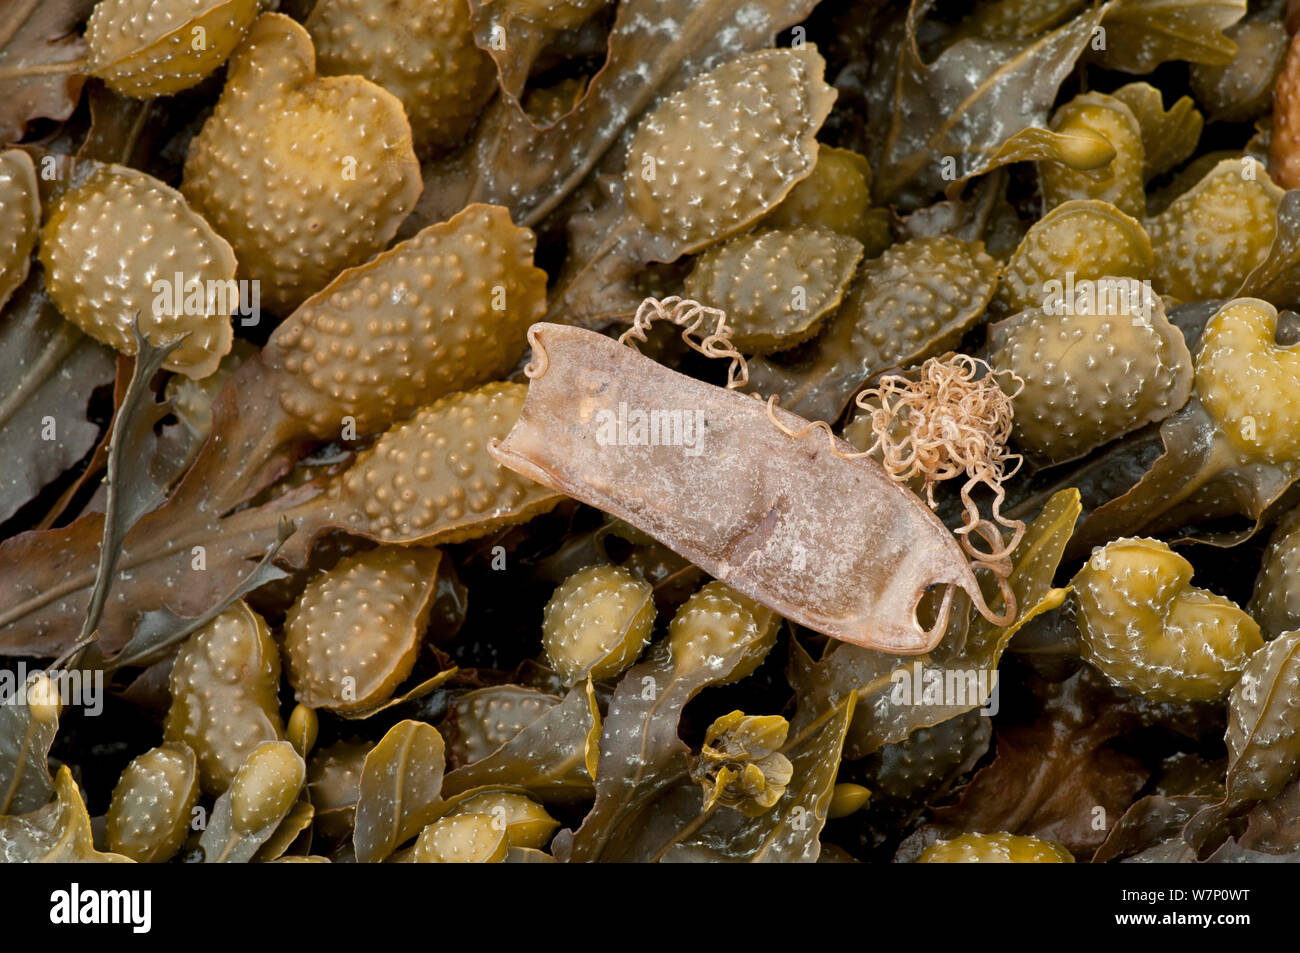 85 Lesser Spotted Dogfish Images, Stock Photos, 3D objects, & Vectors |  Shutterstock